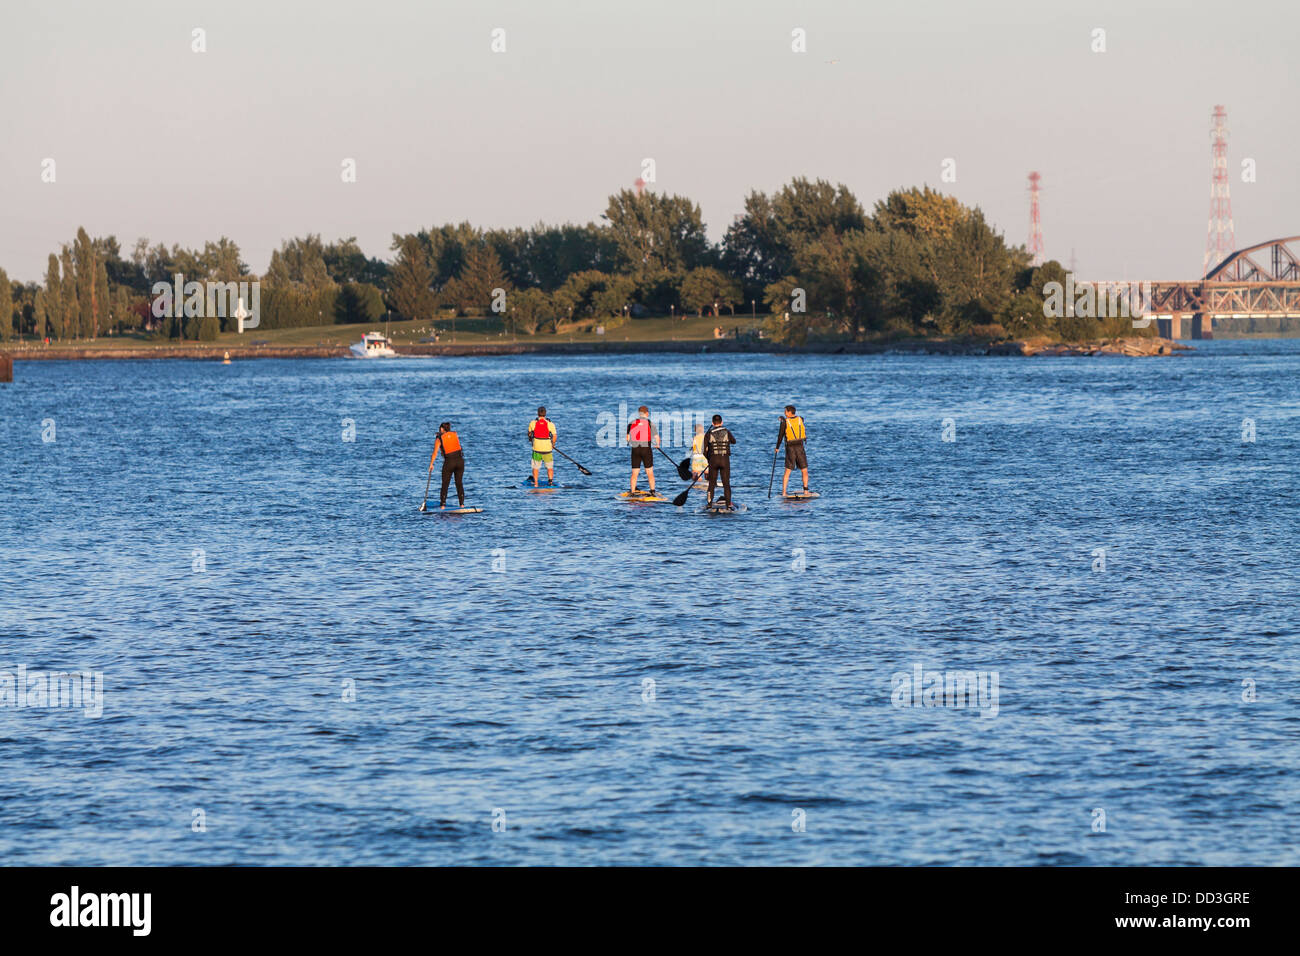 River surfing on Saint Lawrence river in Montreal Stock Photo